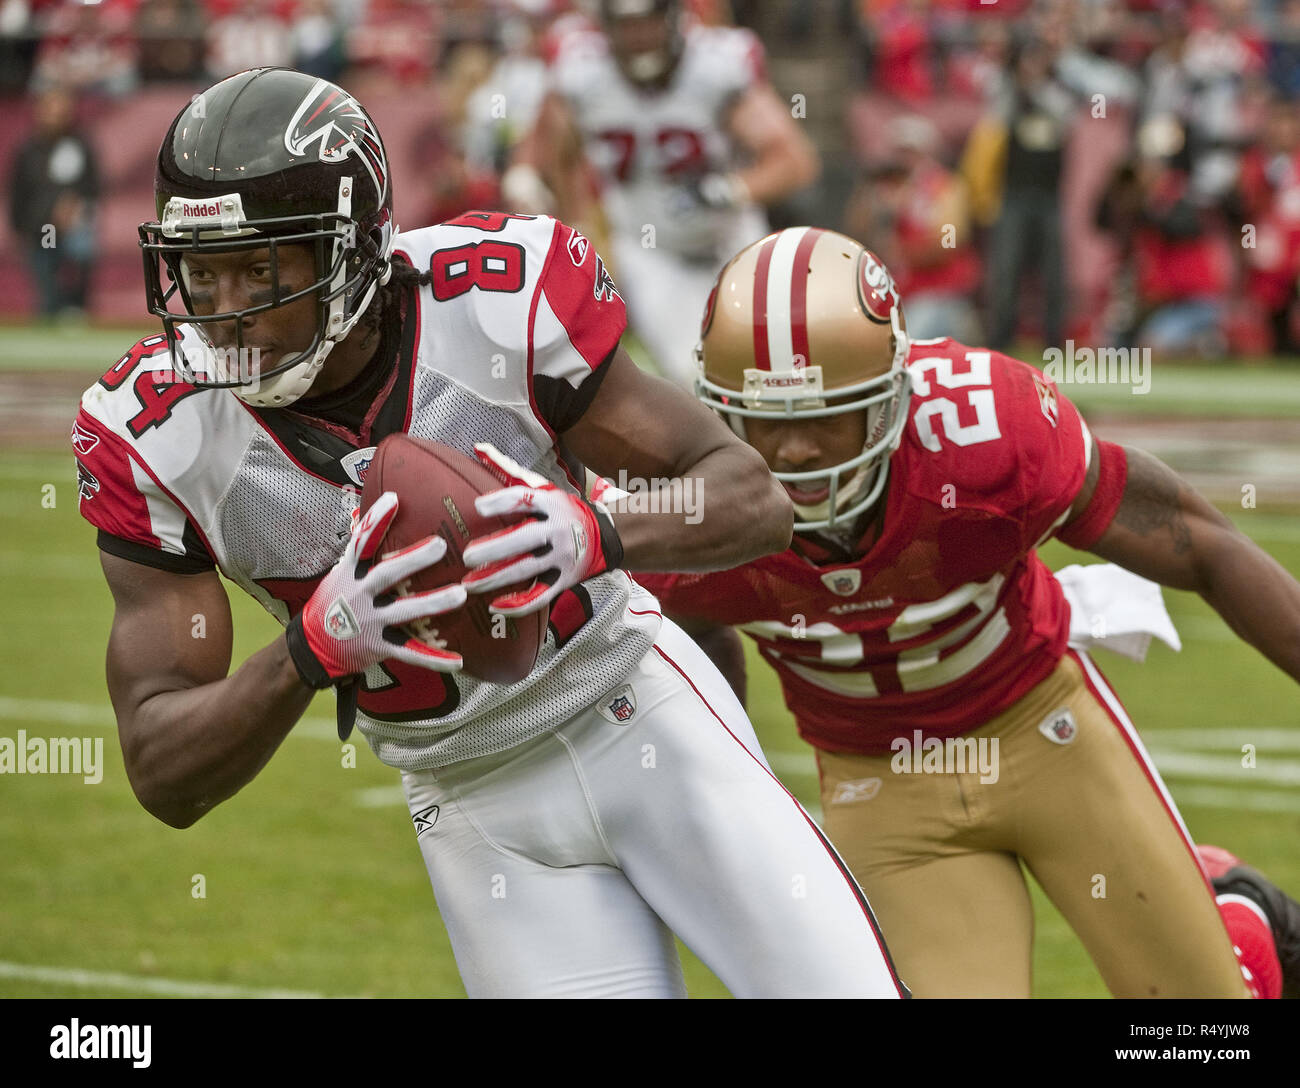 San Francisco, California, USA. 11th Oct, 2009. Atlanta Falcons wide receiver Roddy White #84 pulls away from San Francisco 49ers cornerback Nate Clements #22 to make 80 yard touchdown run on Sunday, October 11, 2009 at Candlestick Park, San Francisco, California. Falcons defeated the 49ers 45-10. Credit: Al Golub/ZUMA Wire/Alamy Live News Stock Photo